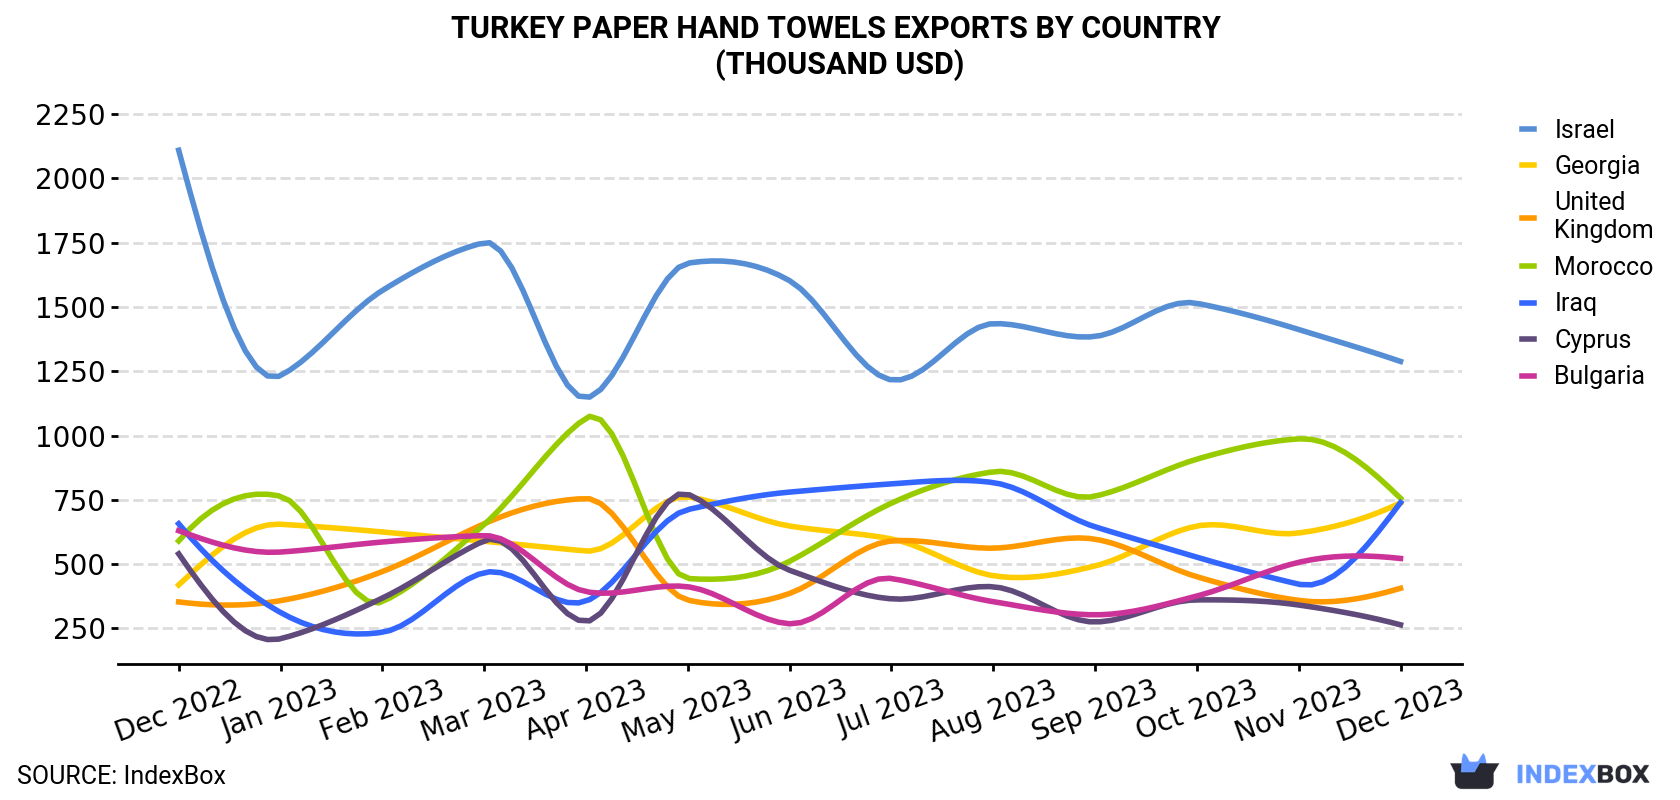 Turkey Paper Hand Towels Exports By Country (Thousand USD)